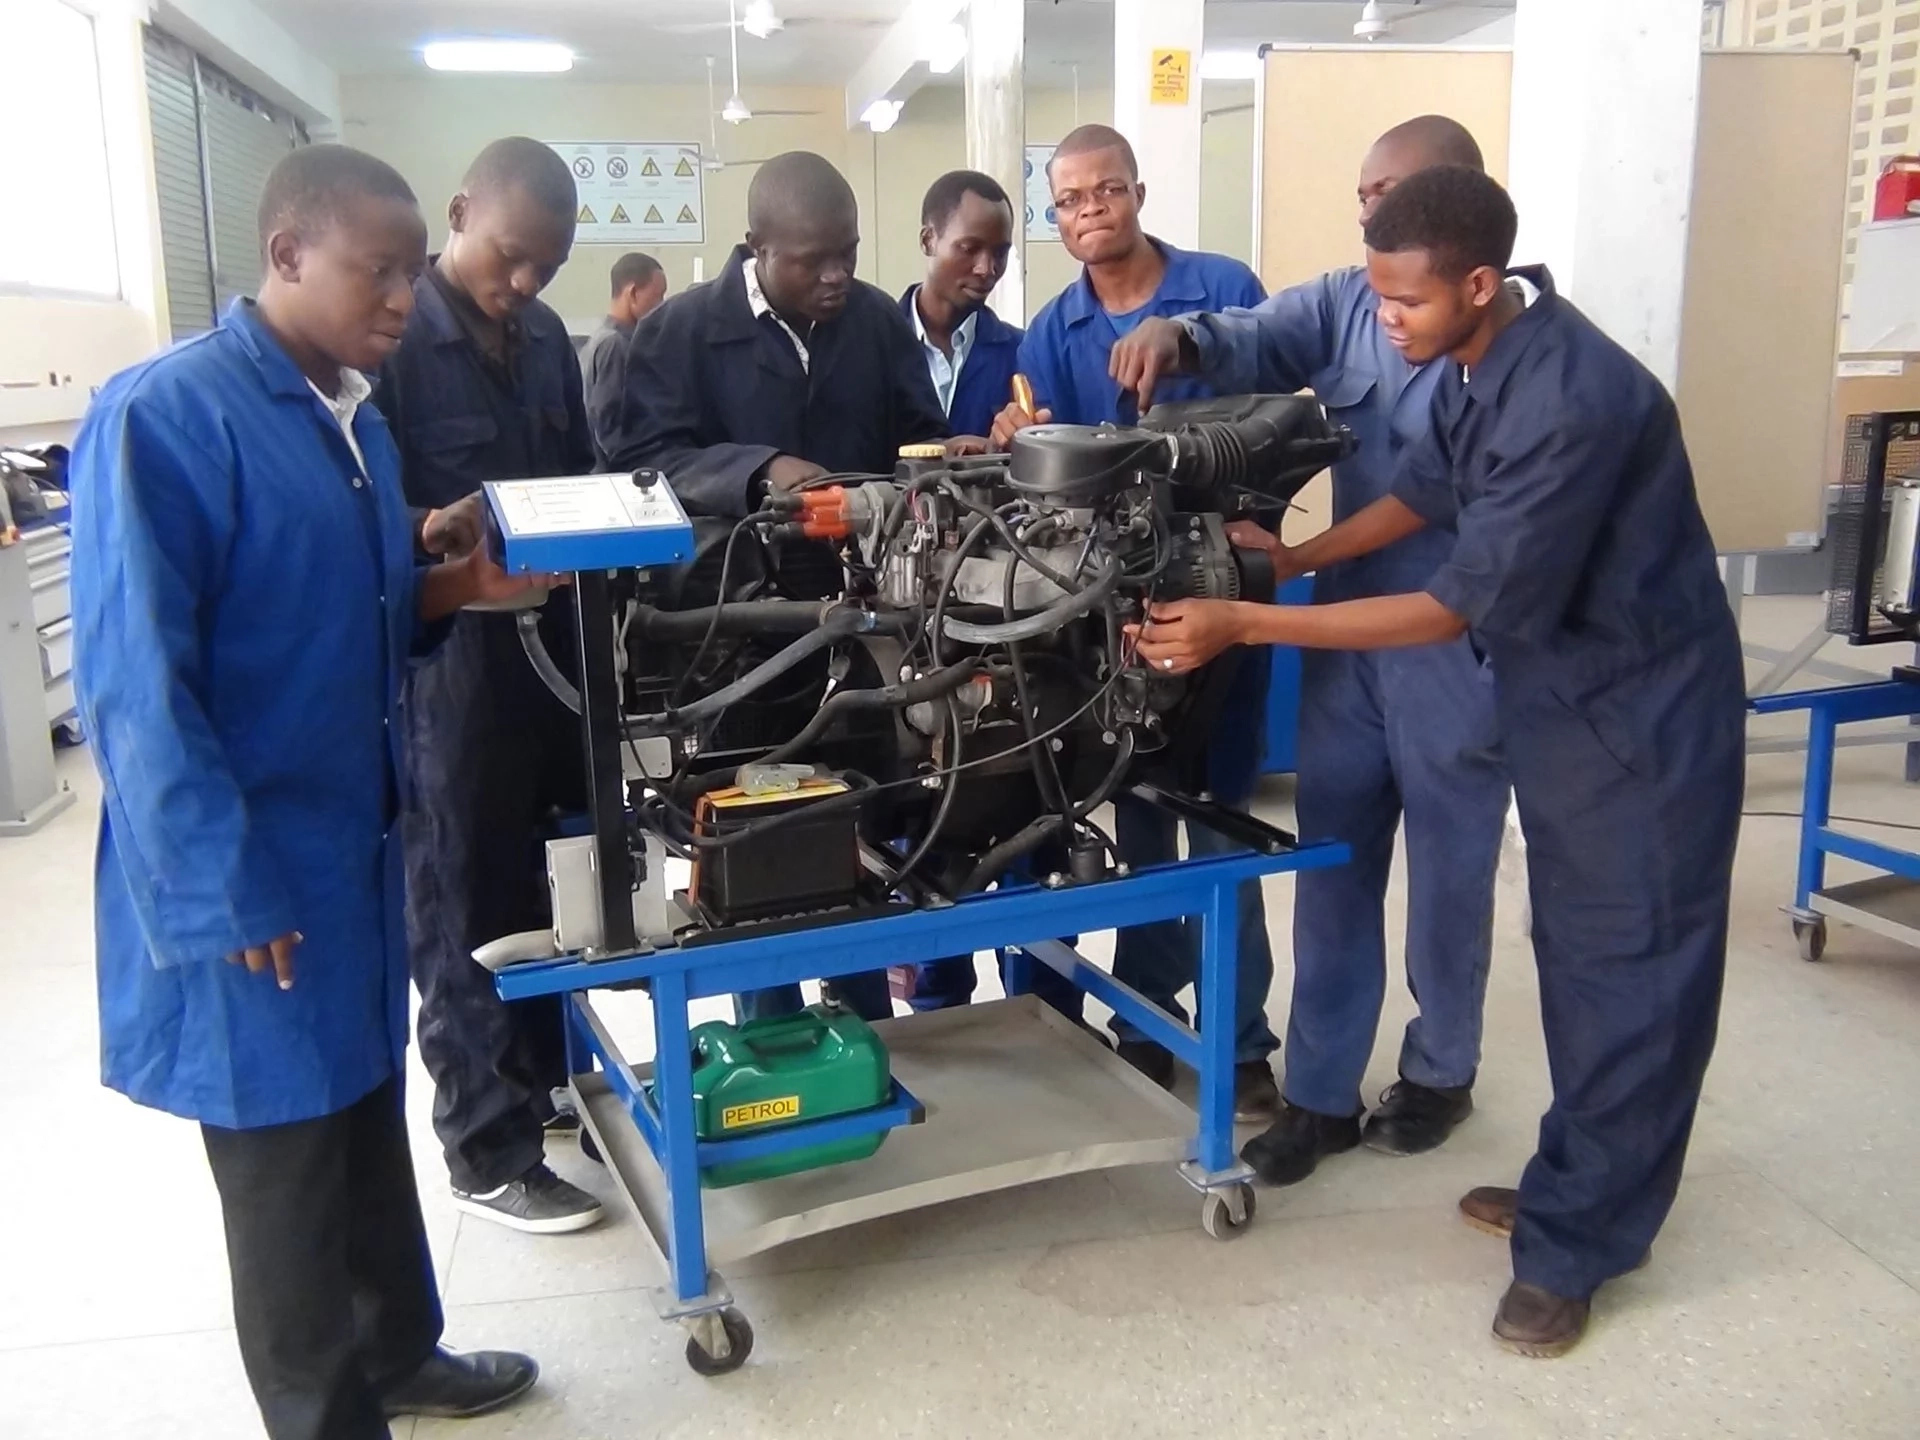 8 Steps to Start a Technical Training Institute in Nigeria